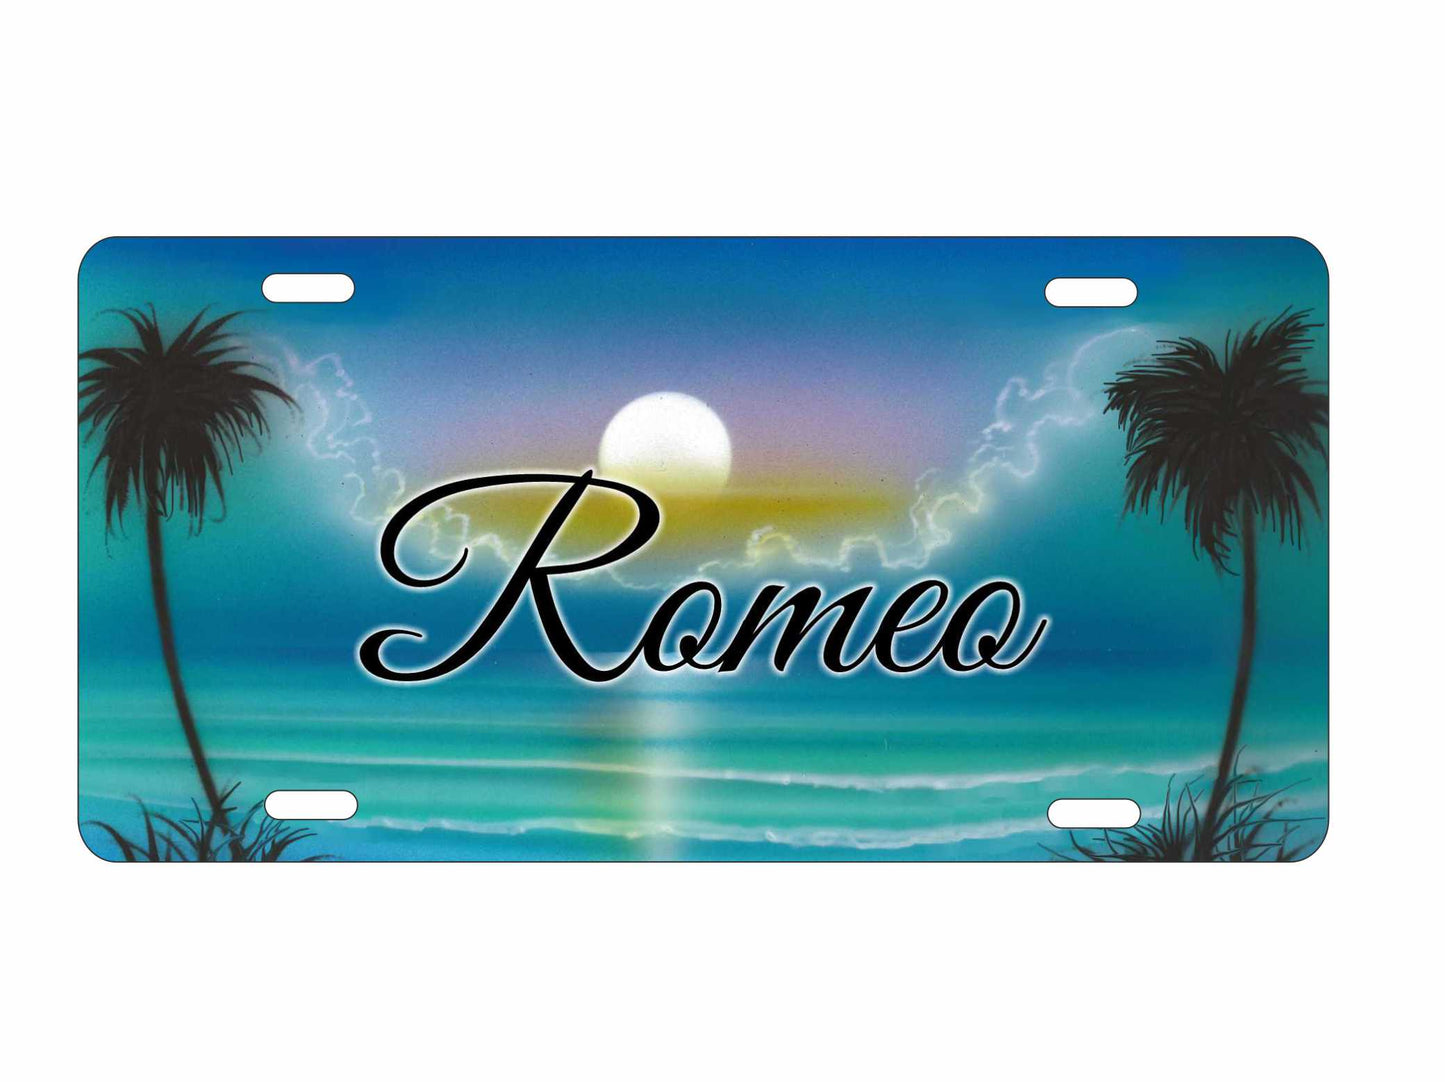 Airbrushed beach scene car tag personalized novelty decorative front license plate